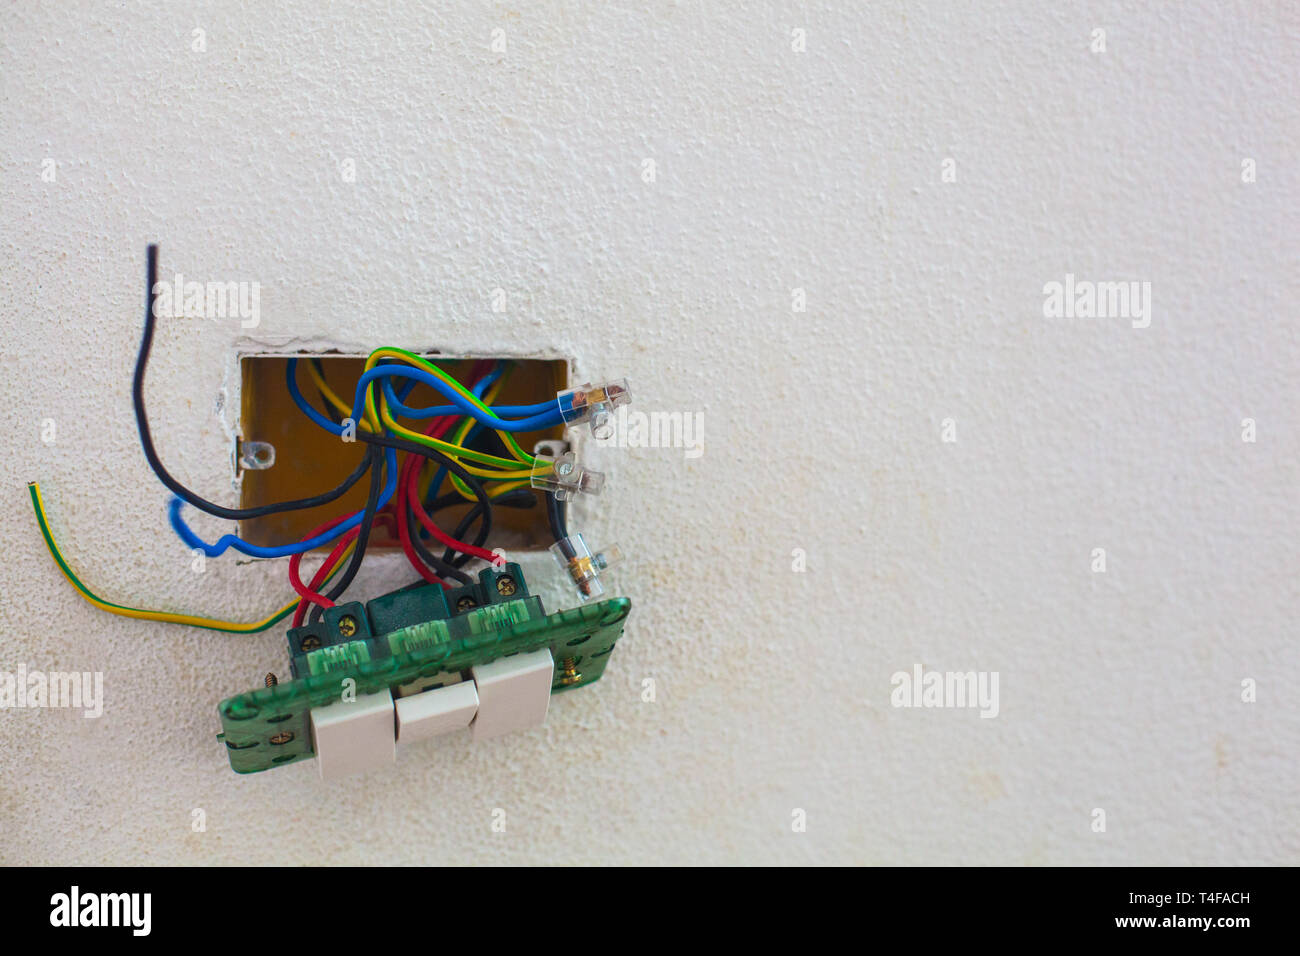 Open light switch with wires sticking out Stock Photo